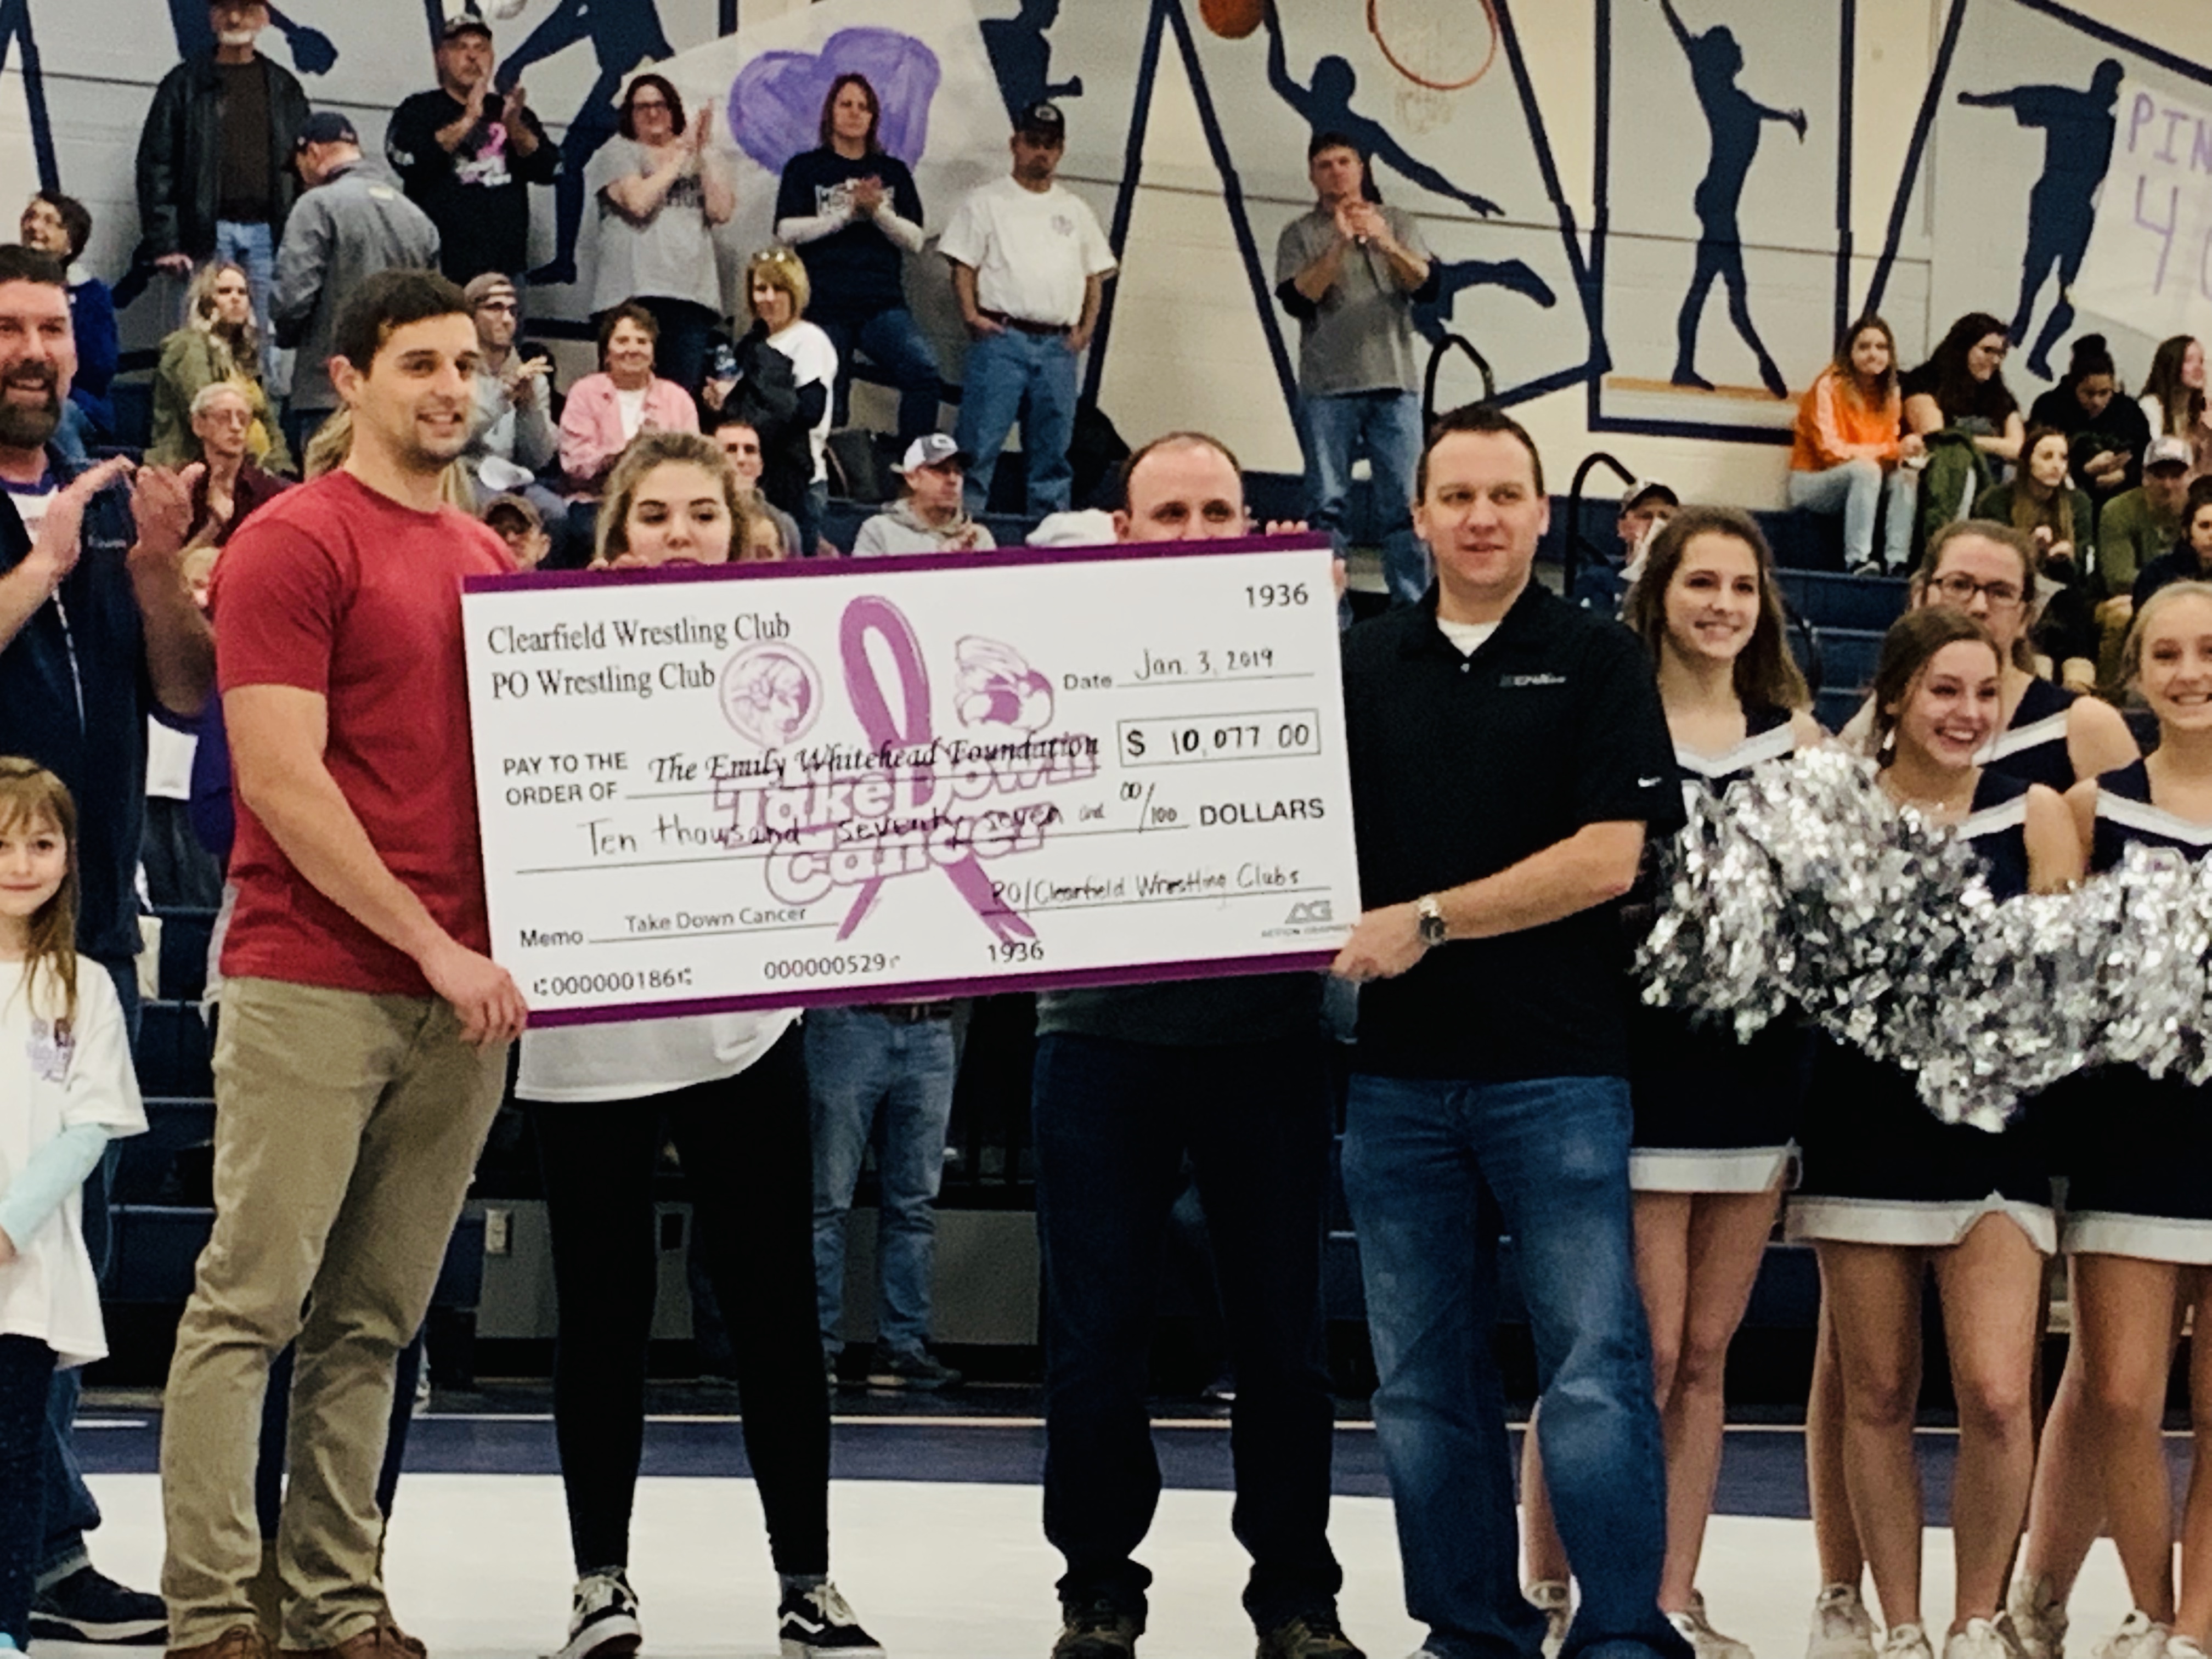 The 4th Annual Takedown Cancer Event Raised Over $10,000 (Photo by HL)